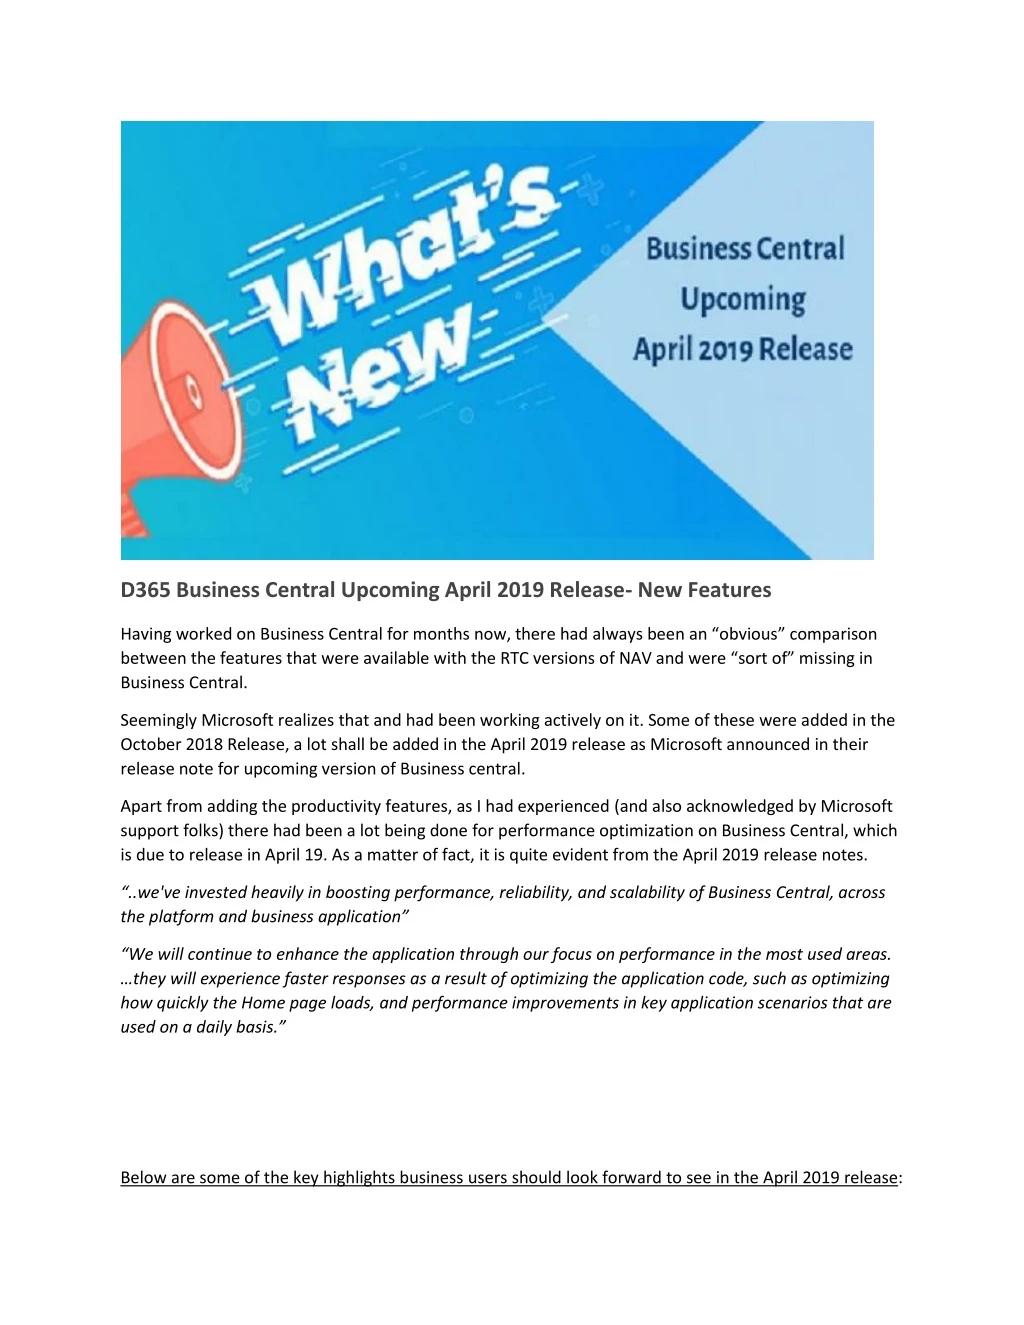 d365 business central upcoming april 2019 release